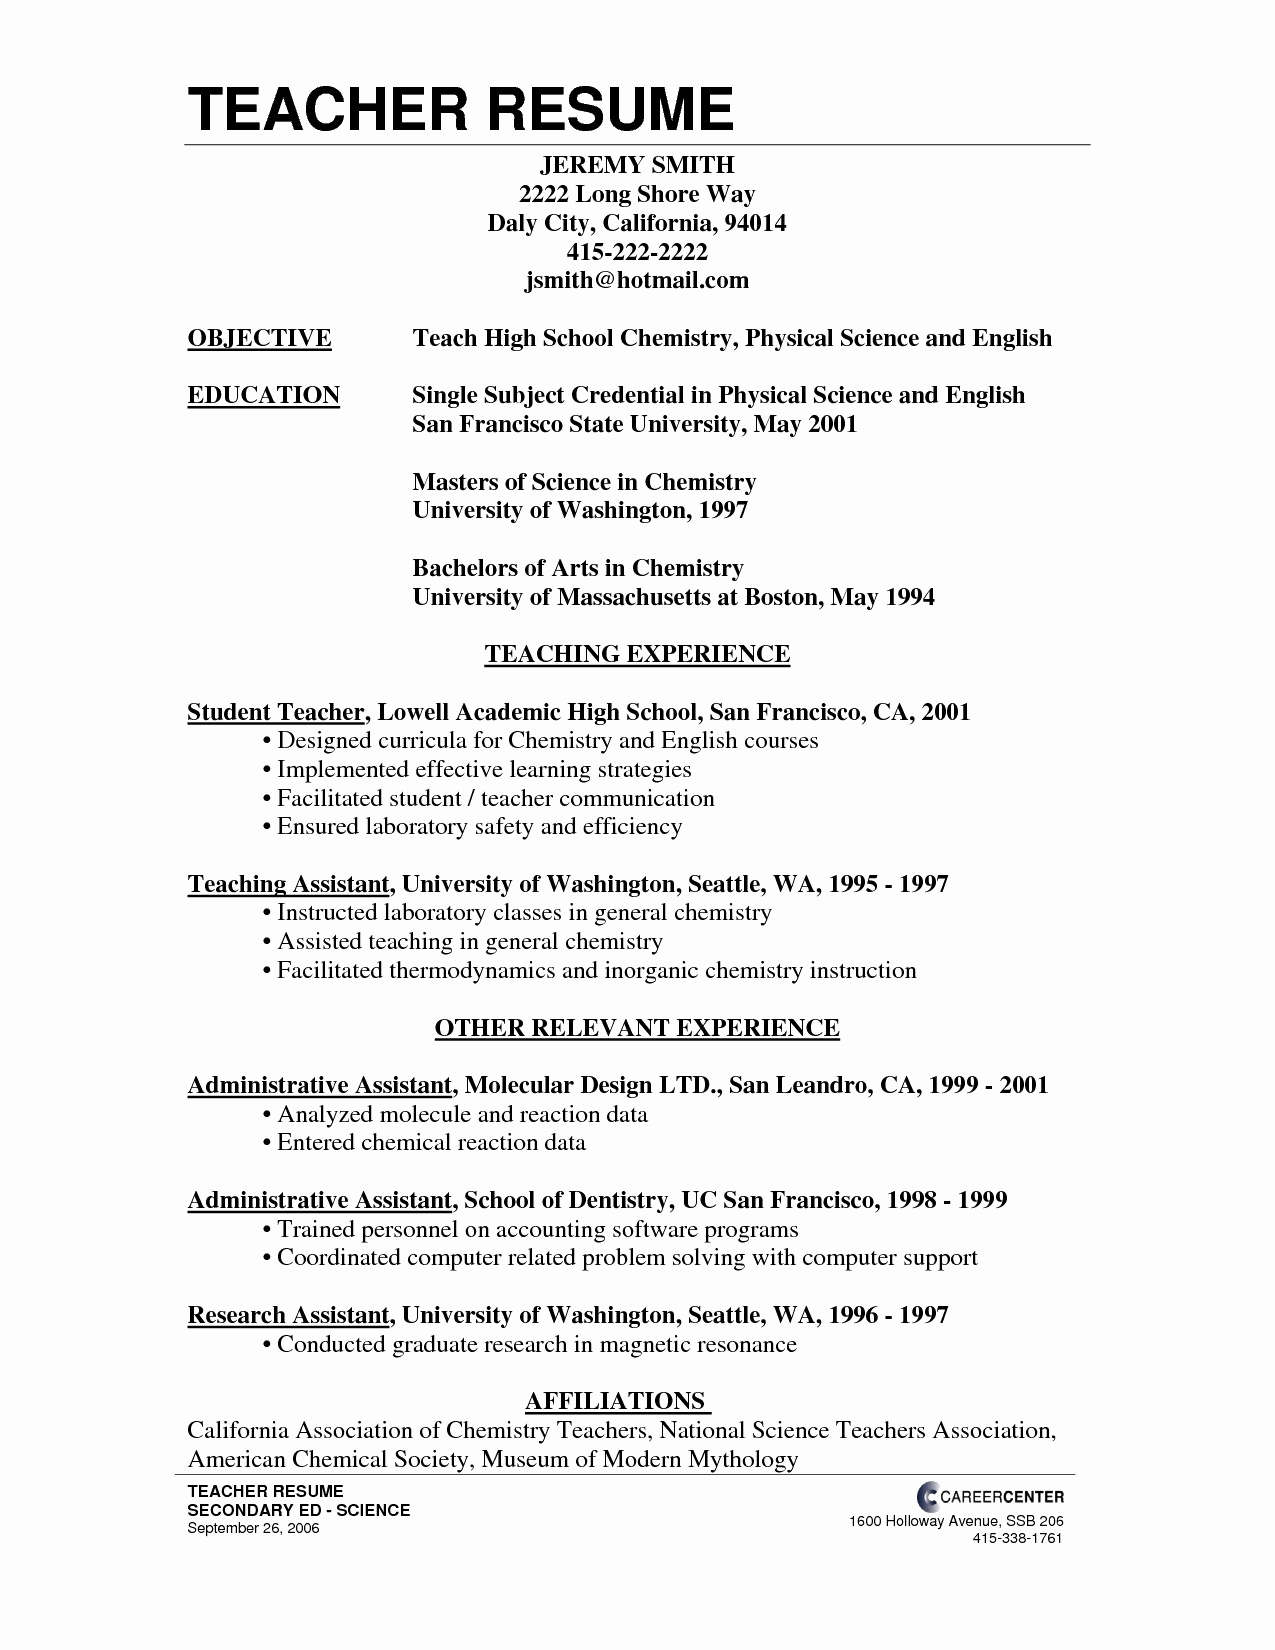 How to Create A Cover Letter Template - Resume Cover Letter Example New Free Cover Letter Templates Examples